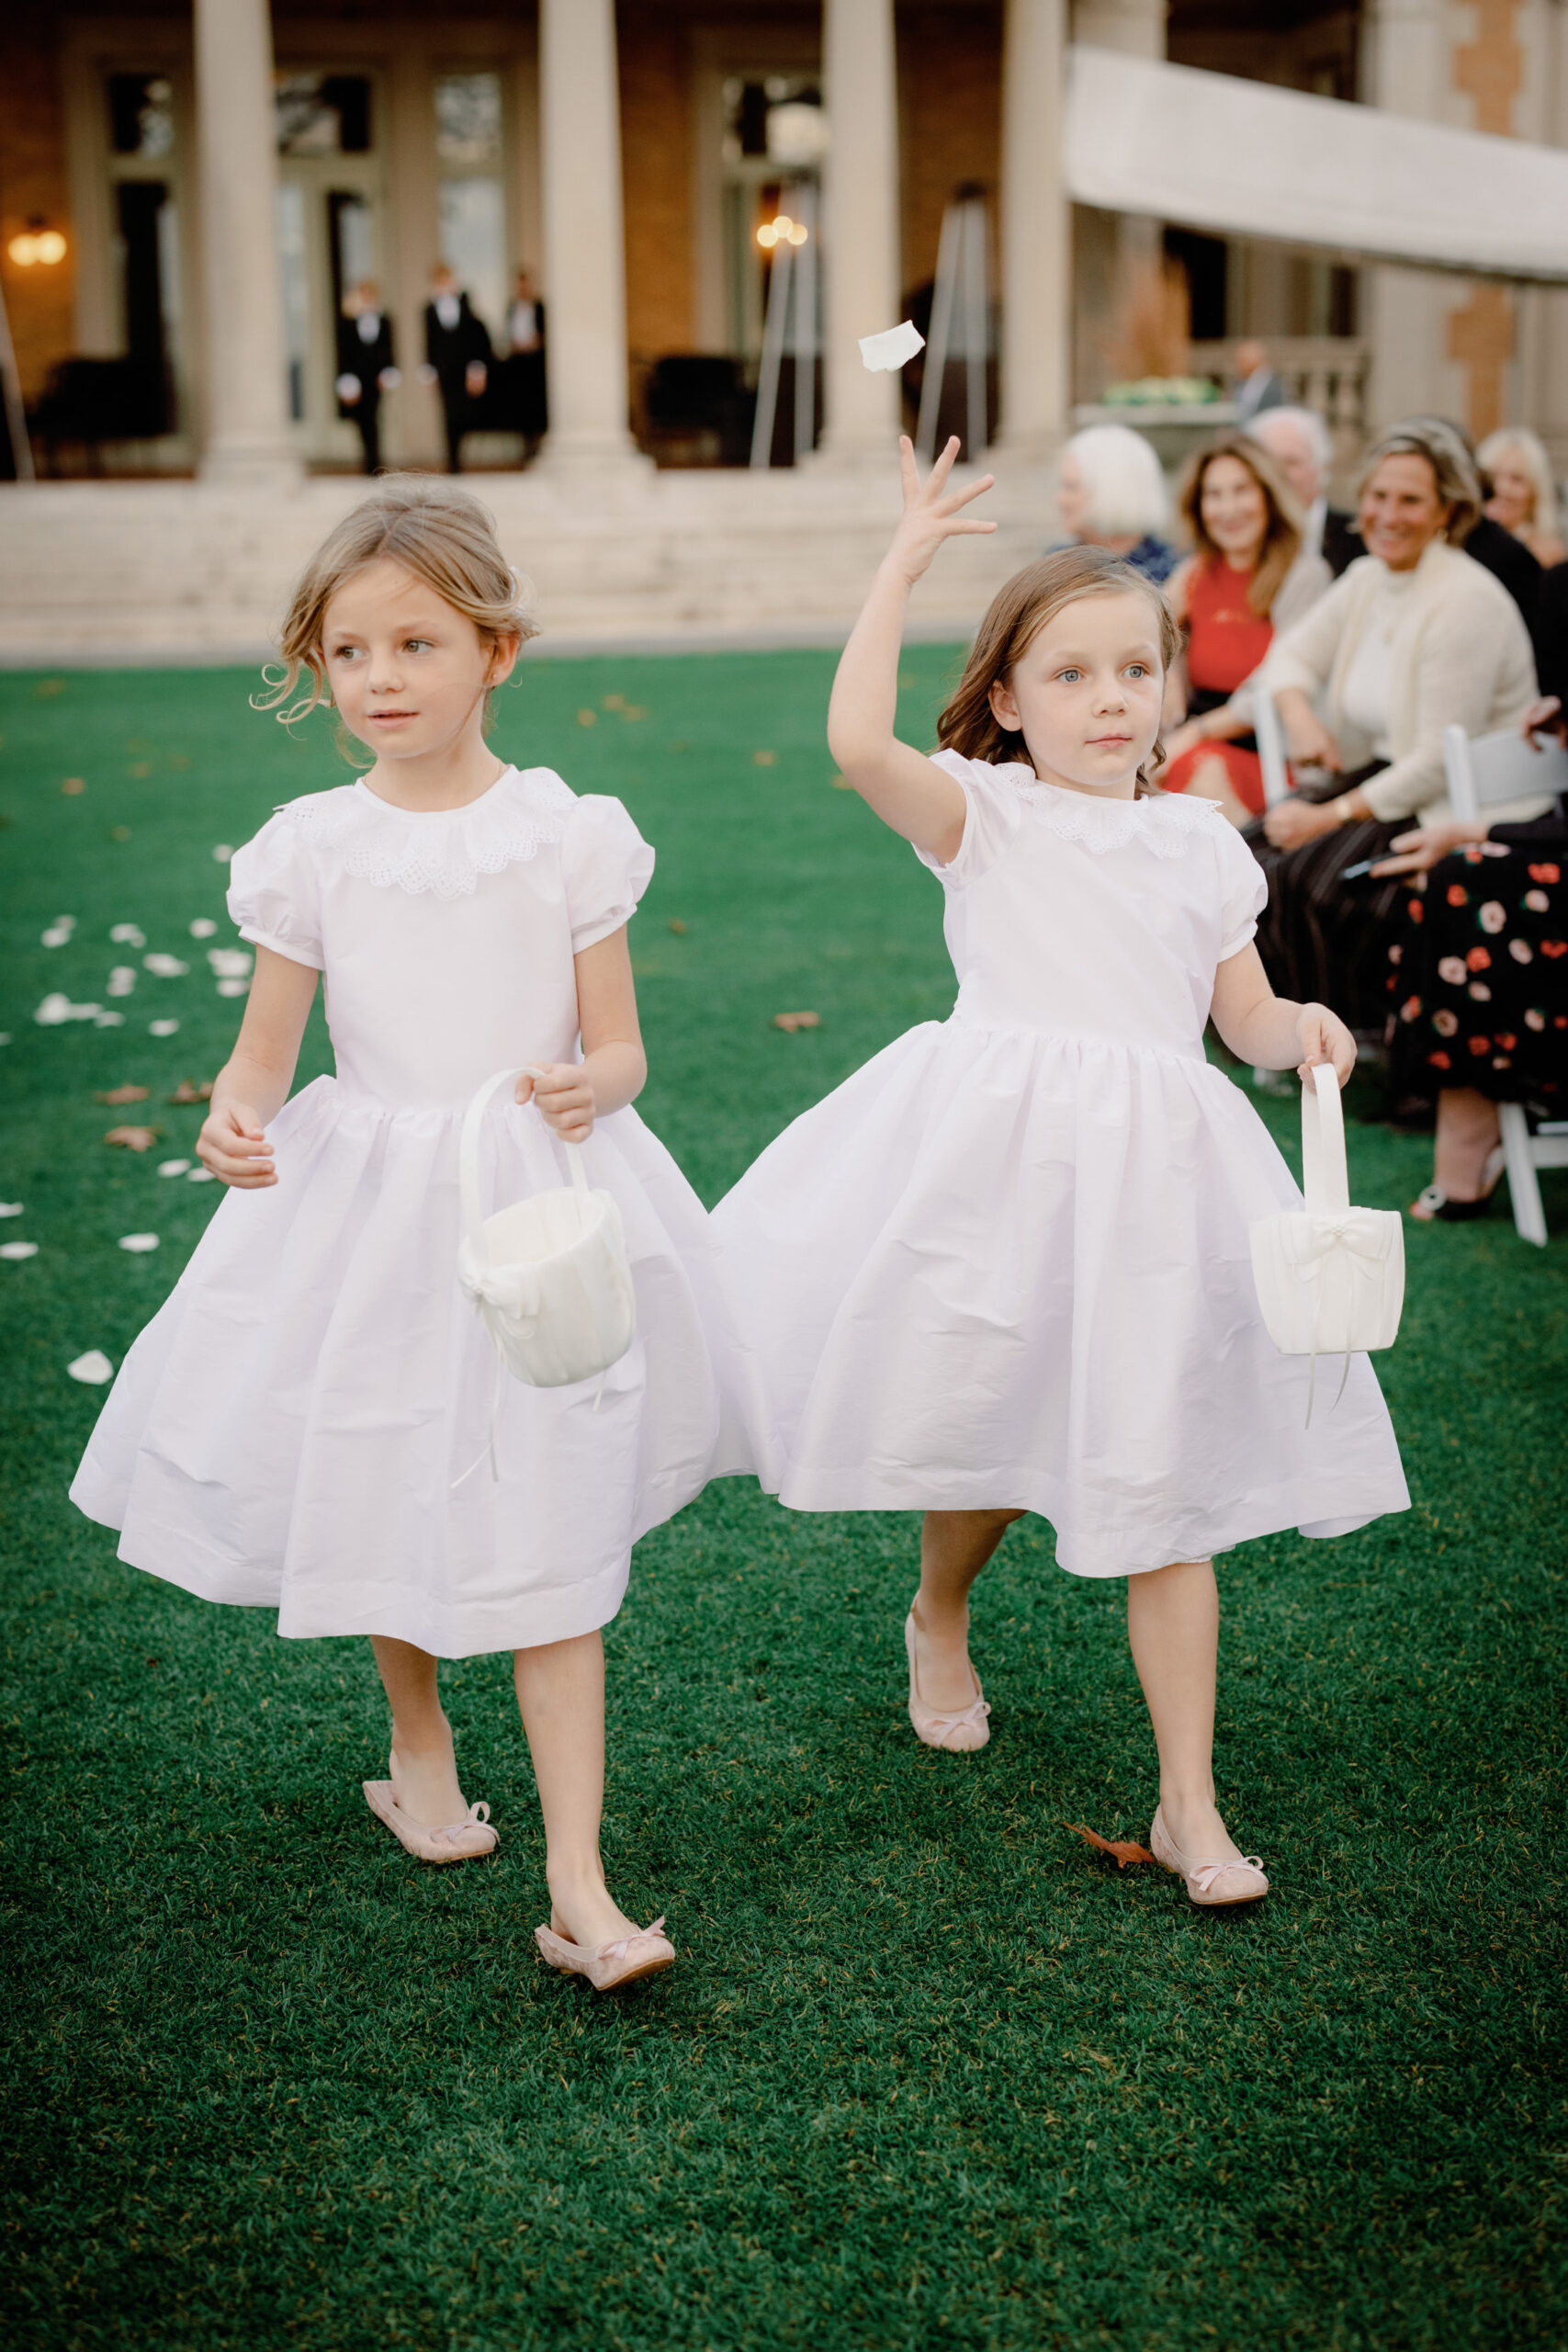 Cute flower girls dropping flower petals while walking in the aisle. Outdoor wedding photography image by Jenny Fu Studio